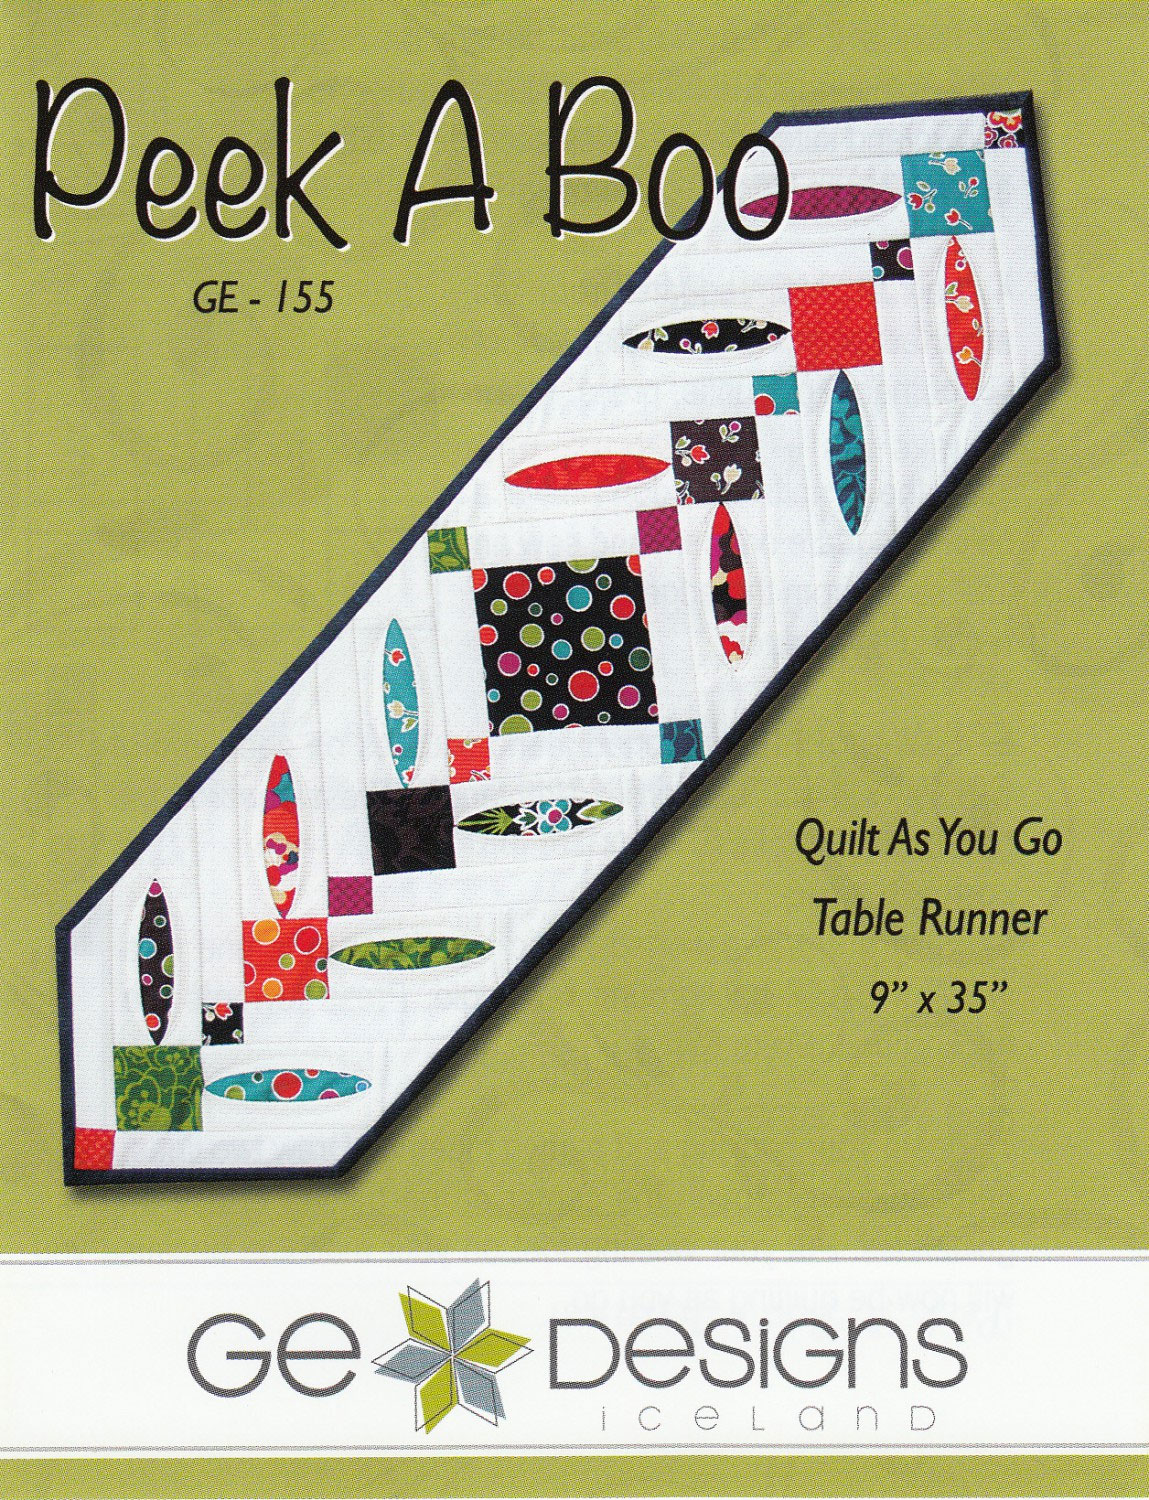 Peek-a-Boo-table-runner-sewing-pattern-GE-Designs-front